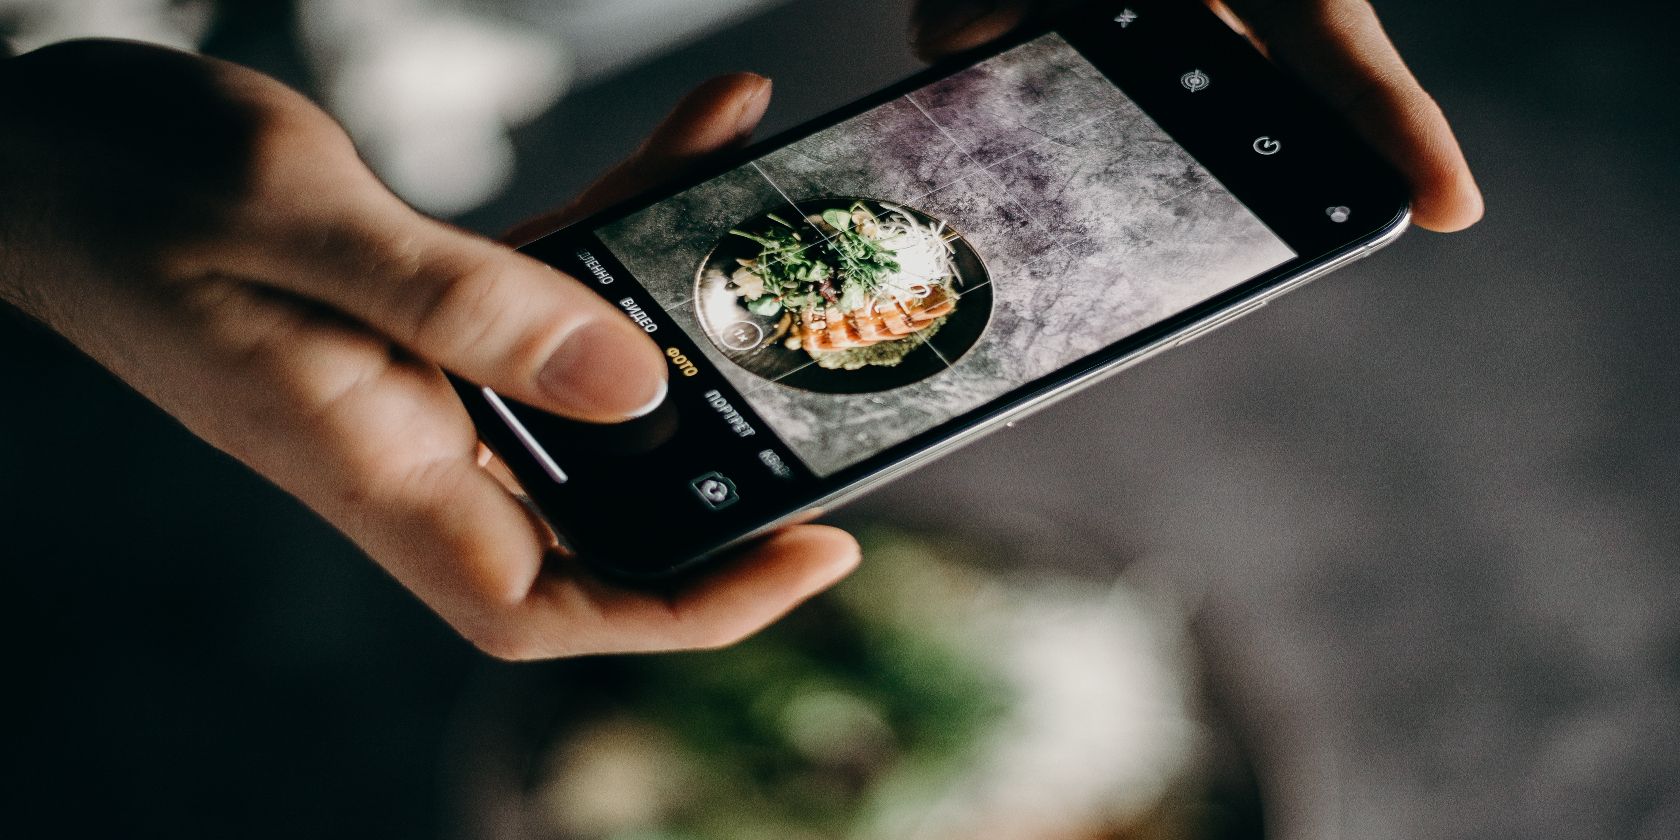 smartphone camera taking picture of food